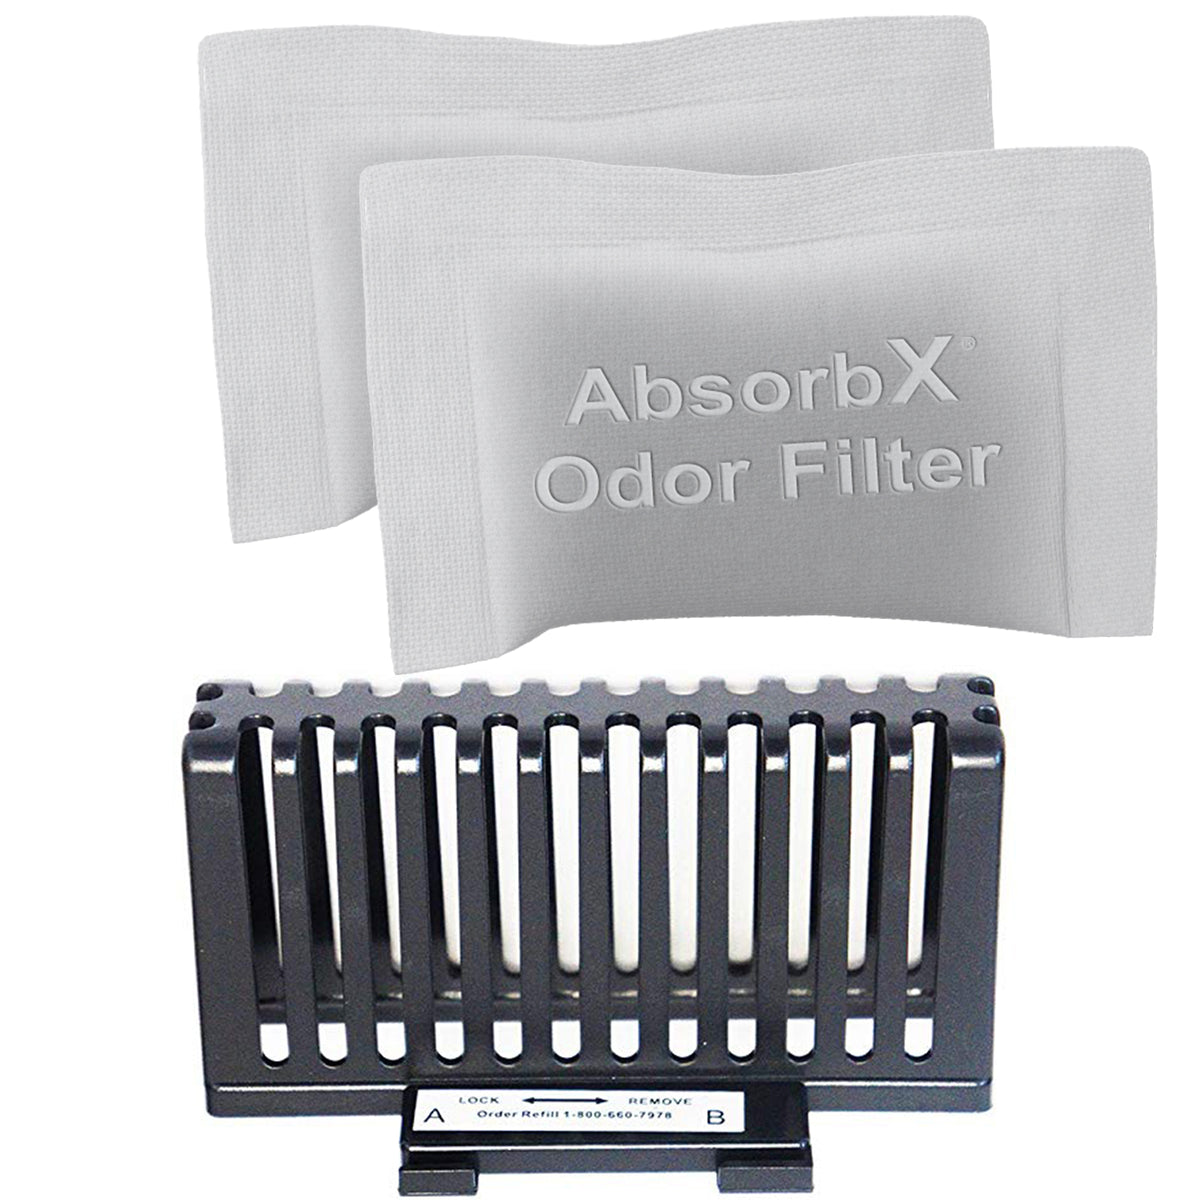 DZT13P, IT13MX or IT13RX filter bundle (2 filters and 1 filter gate)